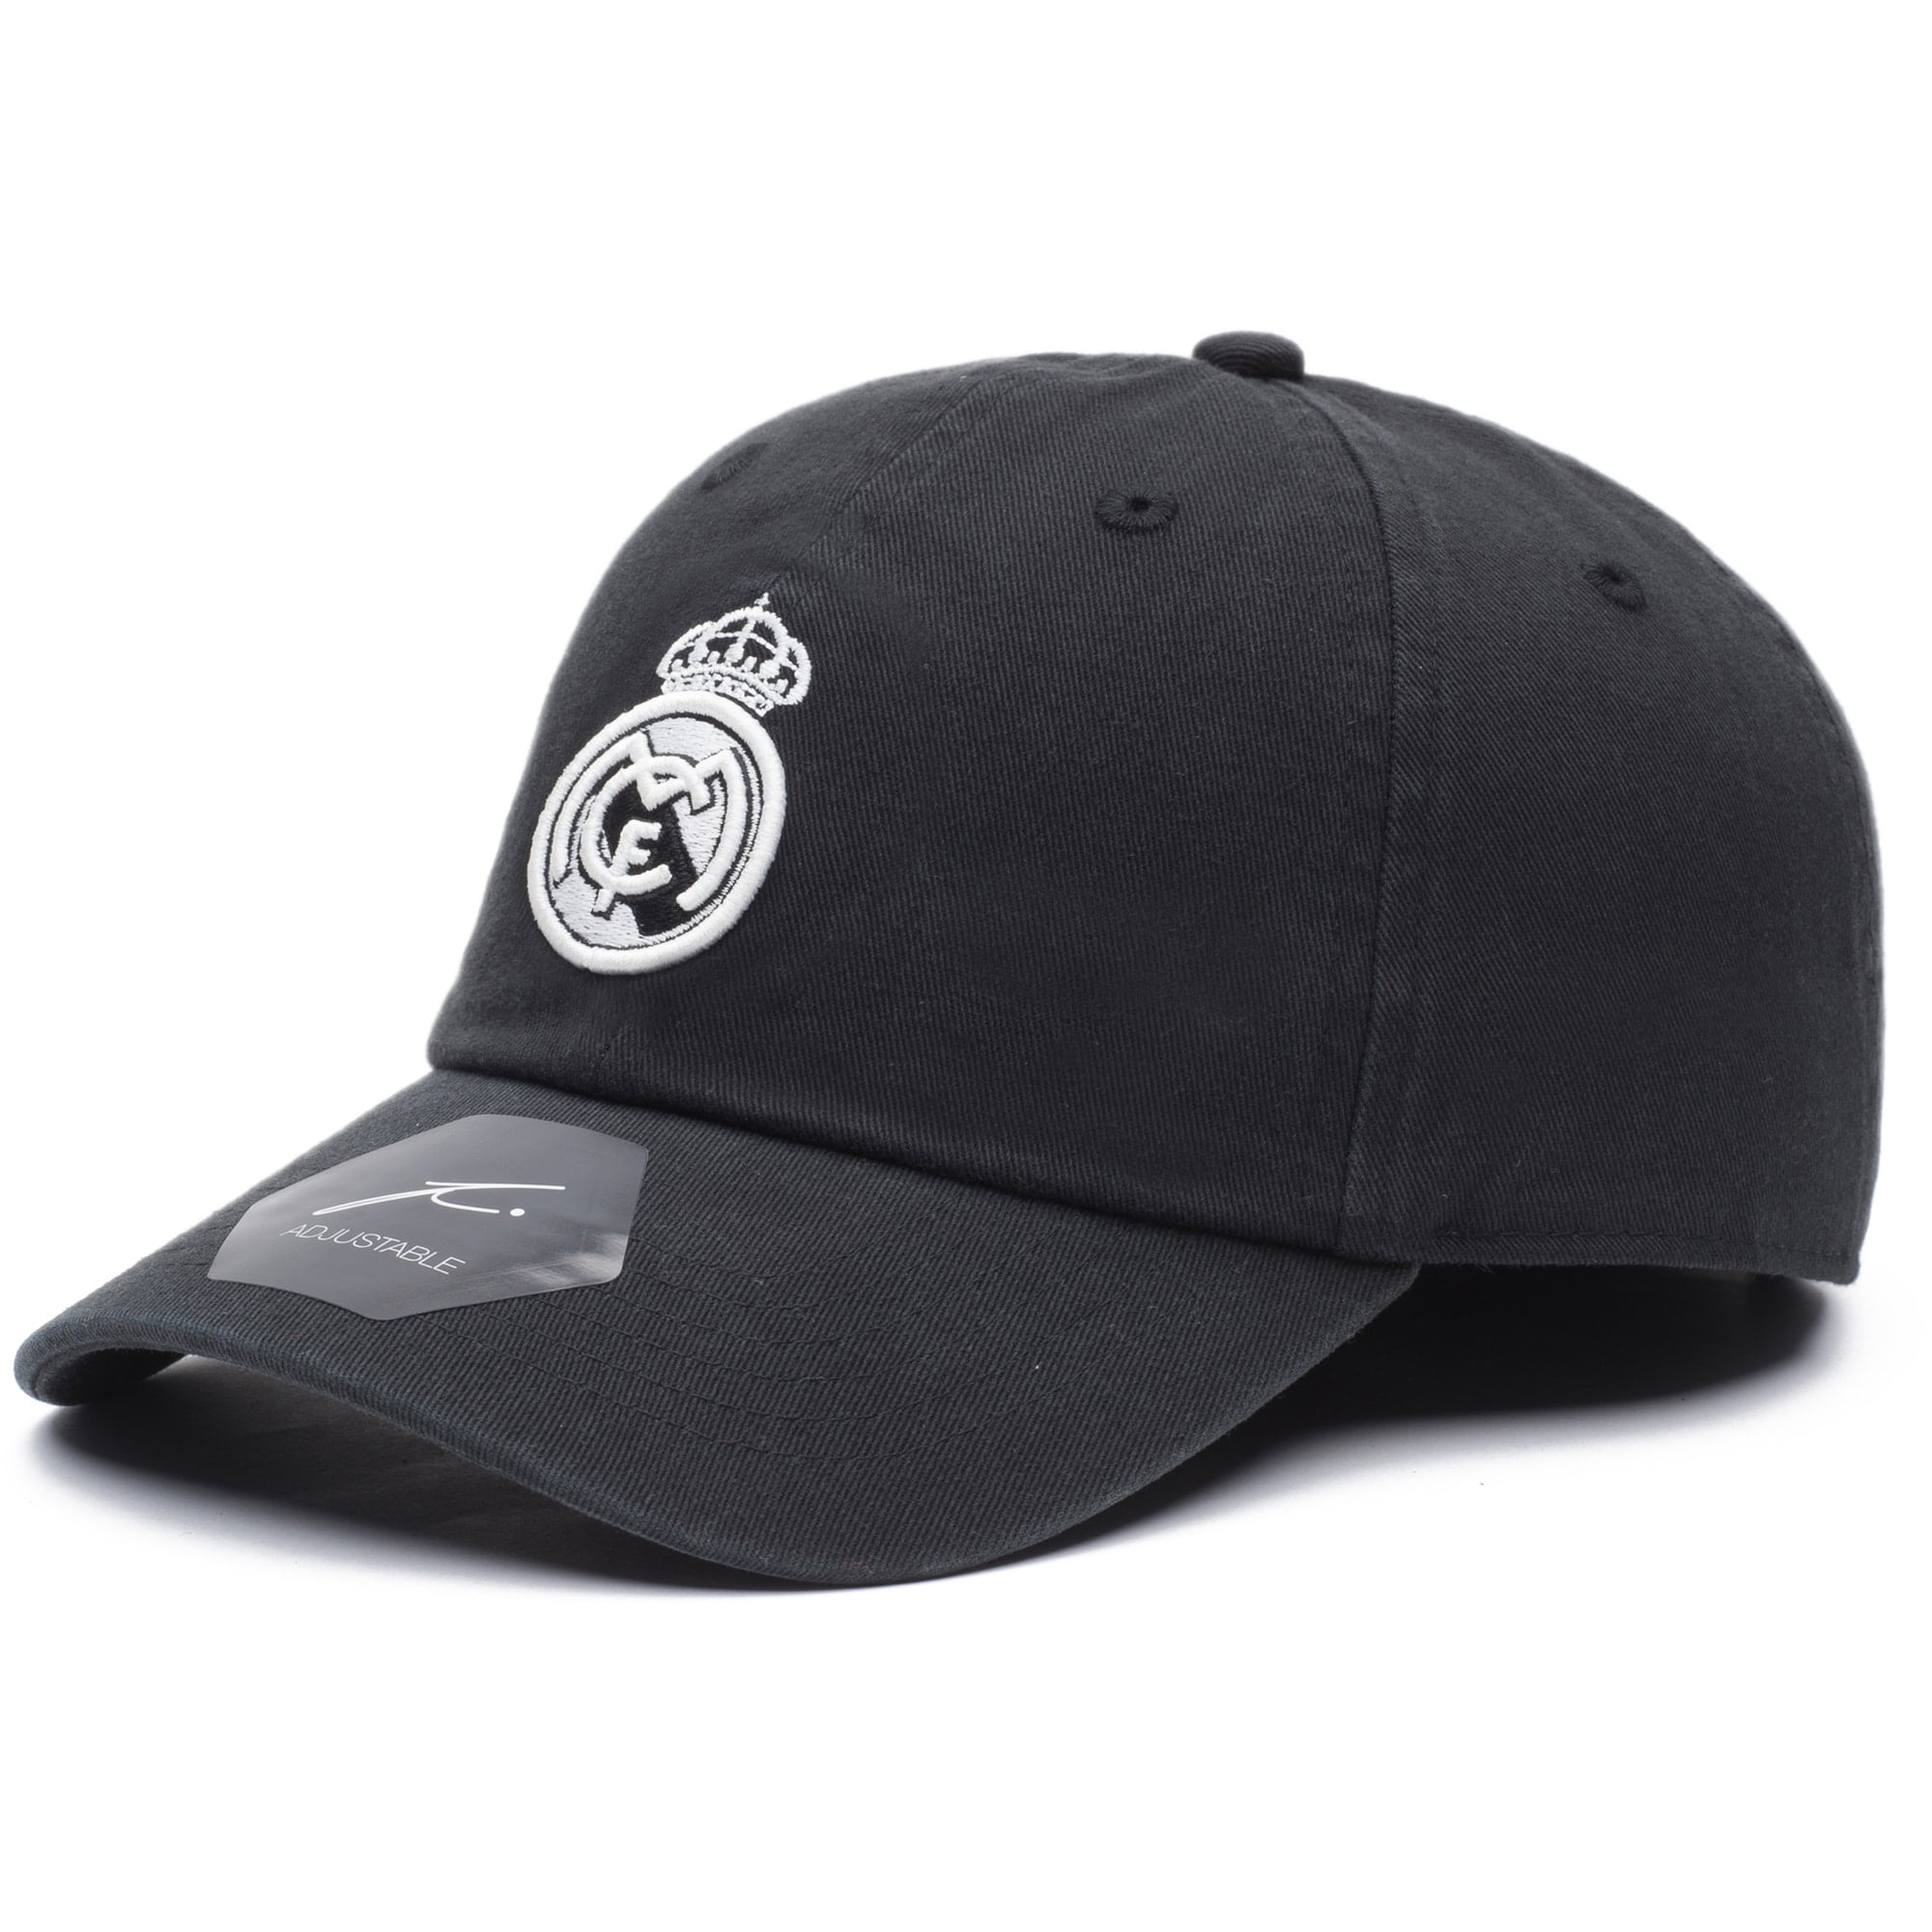 Fan Ink Real Madrid Soft Touch Adjustable Snapback Hat/Cap Grey/Blue